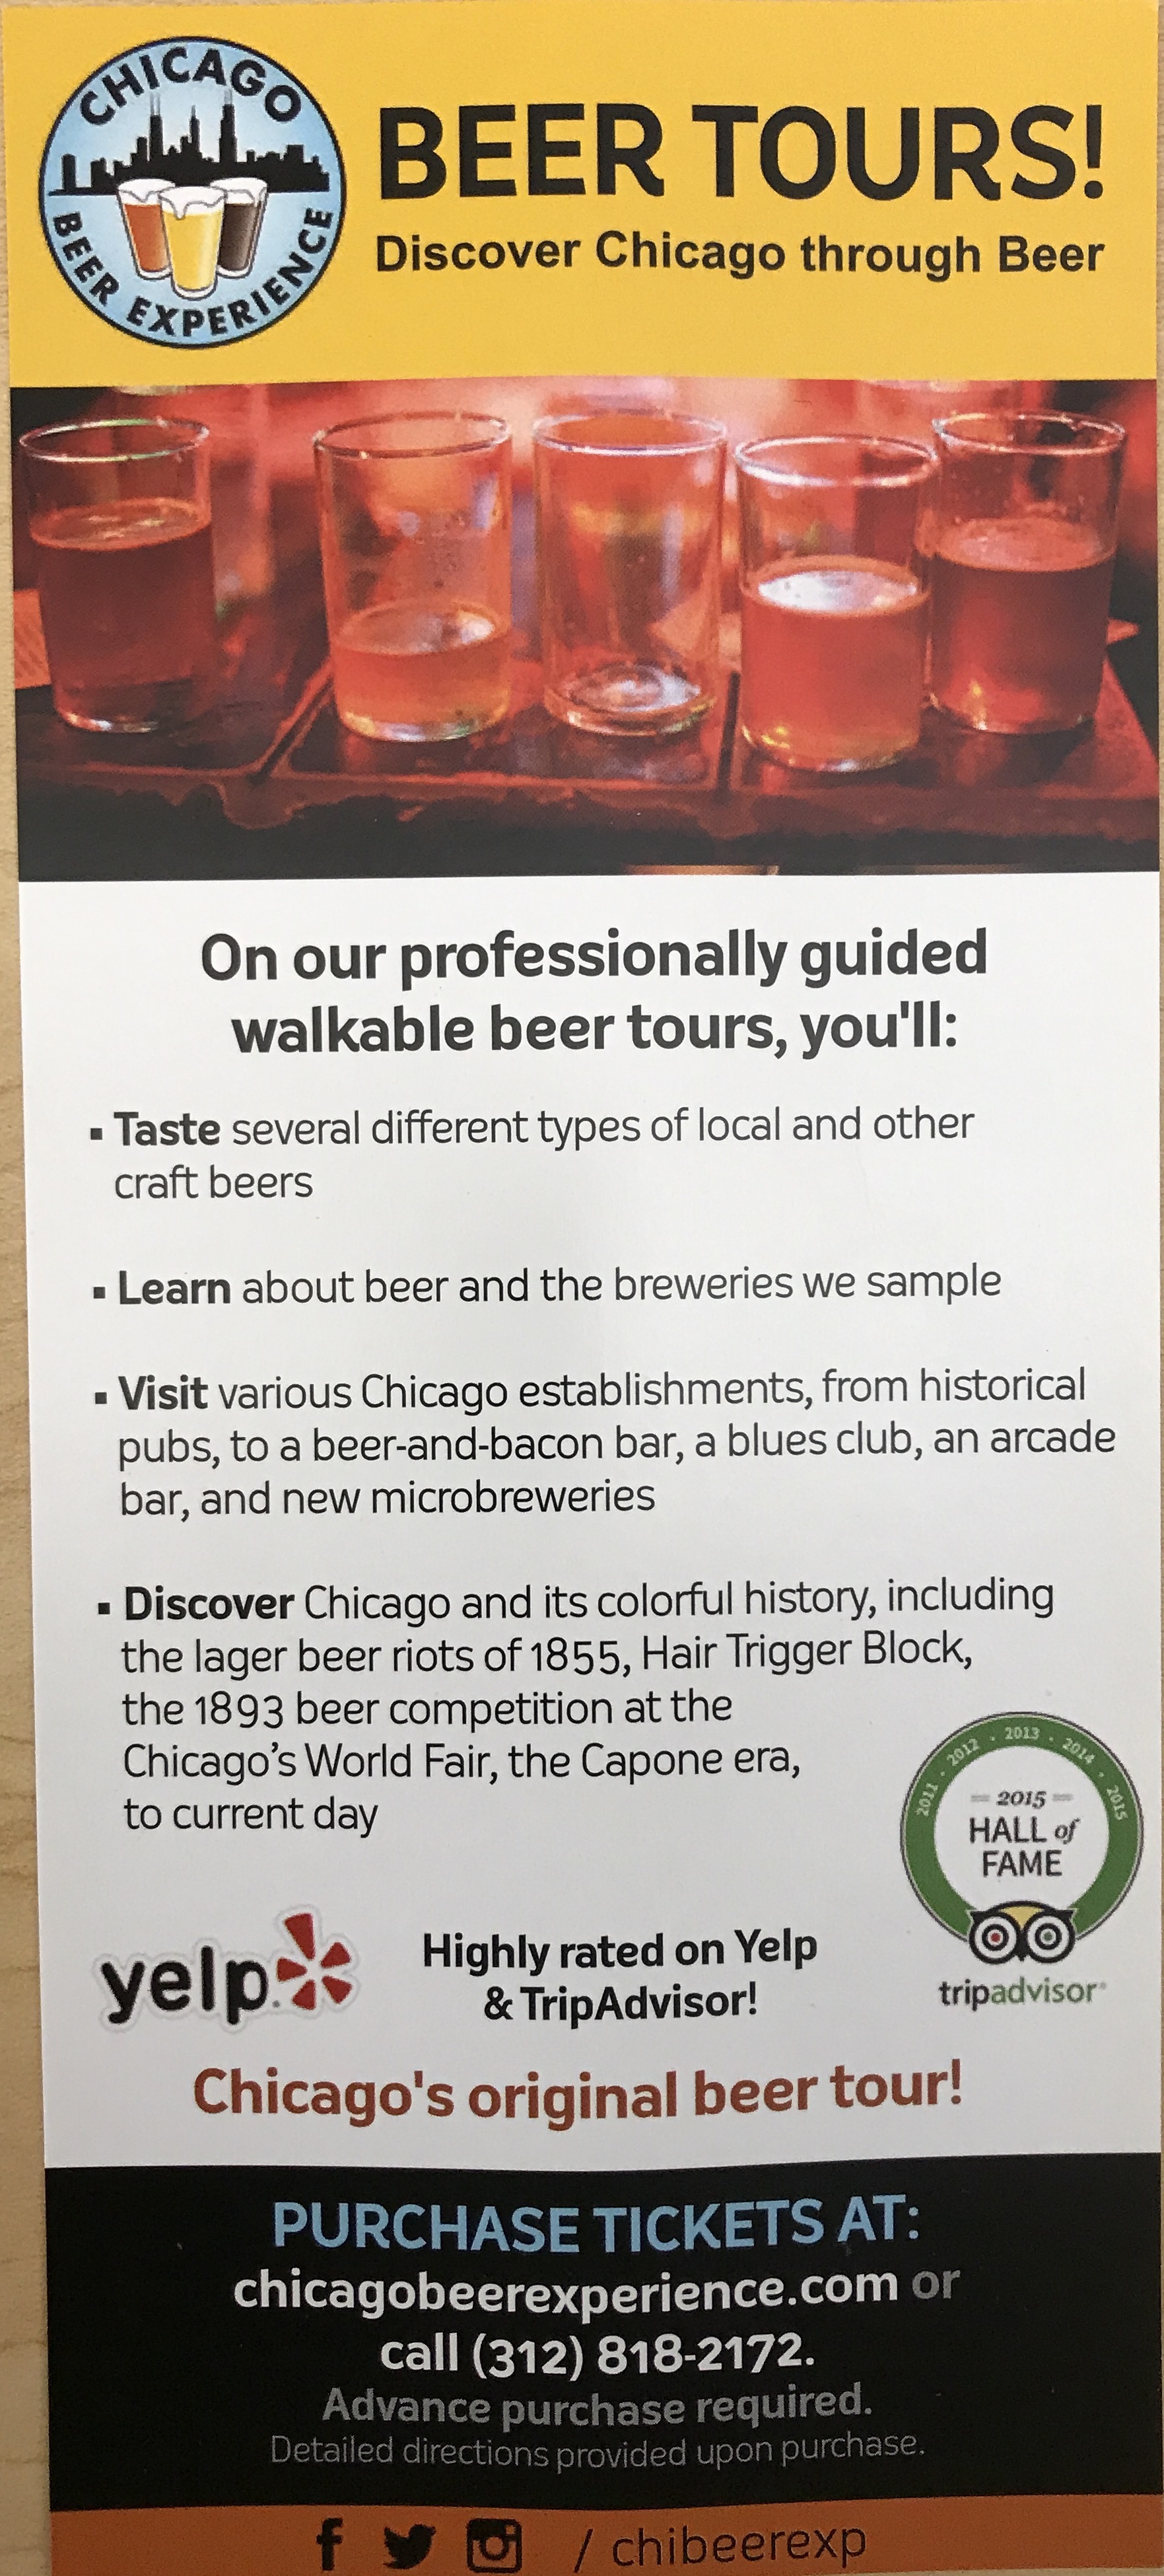 Chicago beer tours infromation pamphlet 2